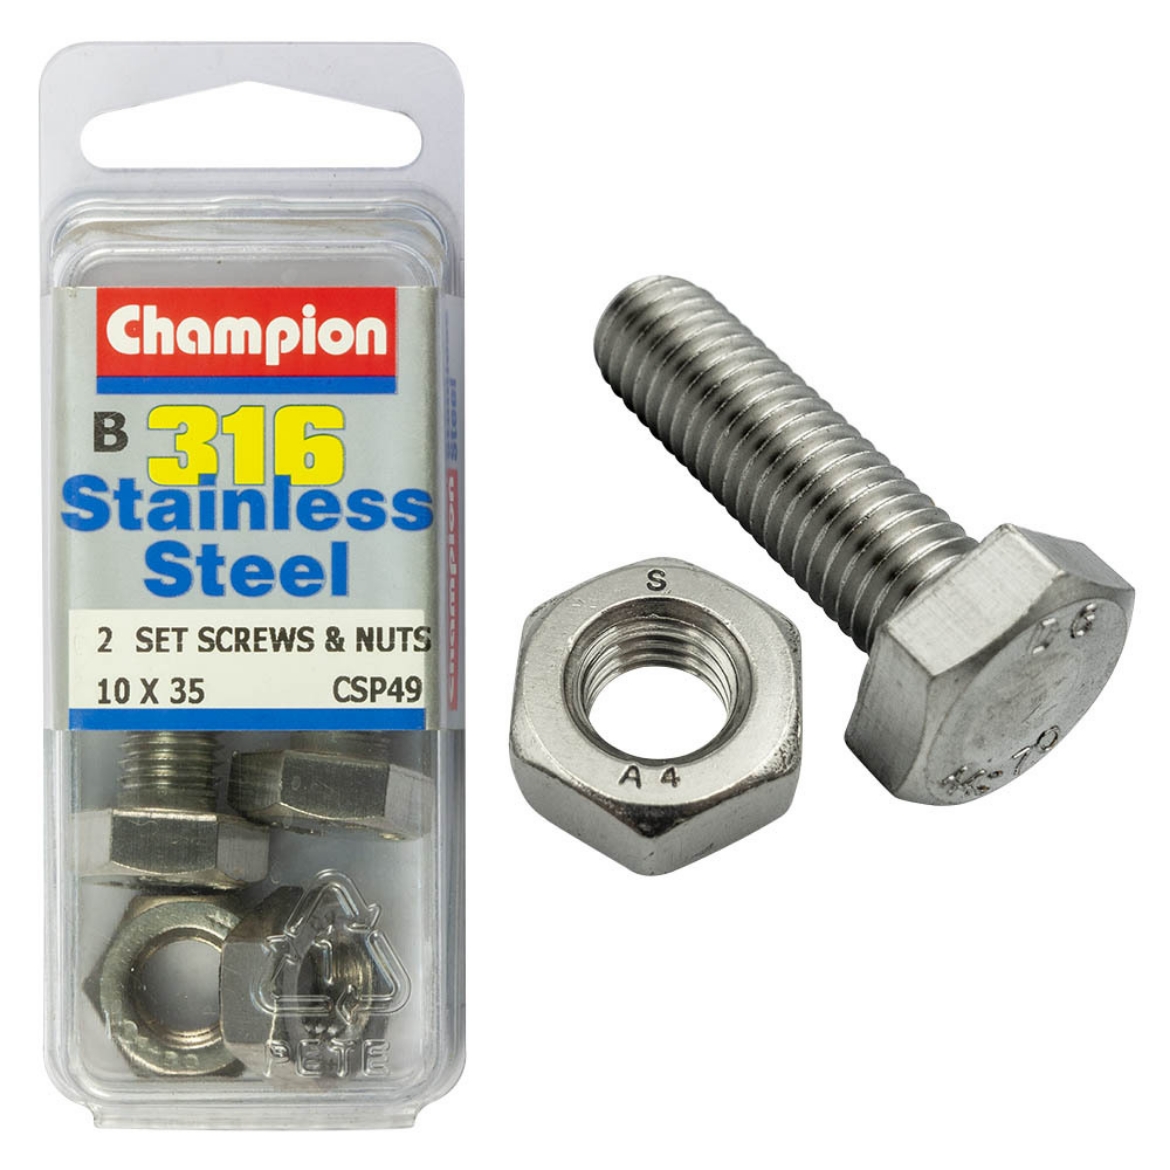 Picture of SET SCREWS & NUTS  10 x 35 (Pkt.2)